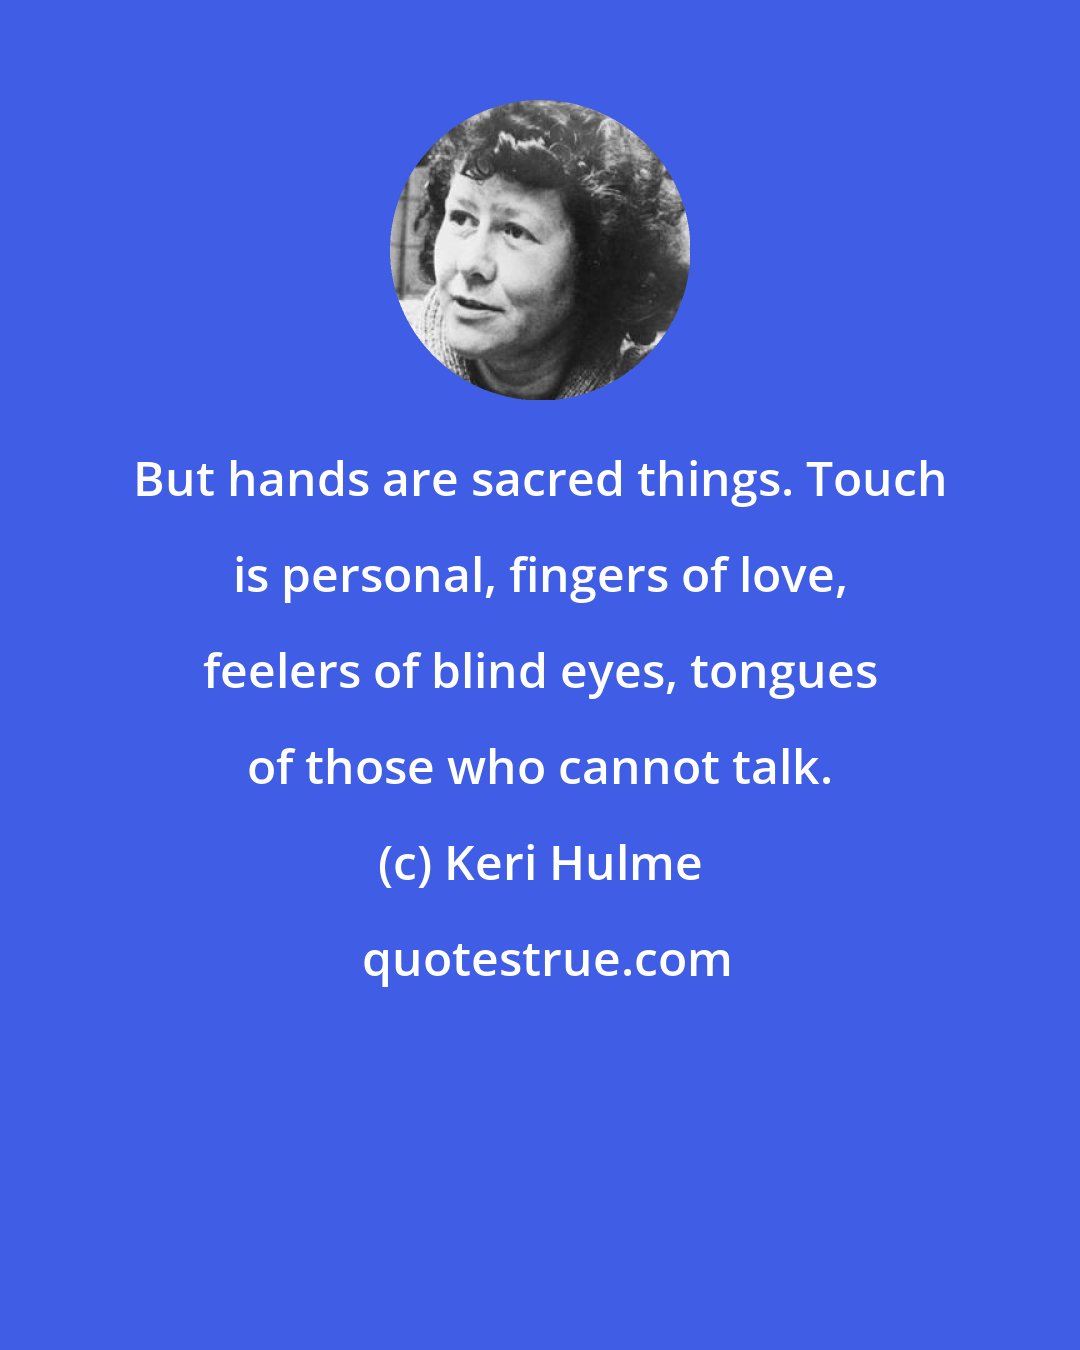 Keri Hulme: But hands are sacred things. Touch is personal, fingers of love, feelers of blind eyes, tongues of those who cannot talk.